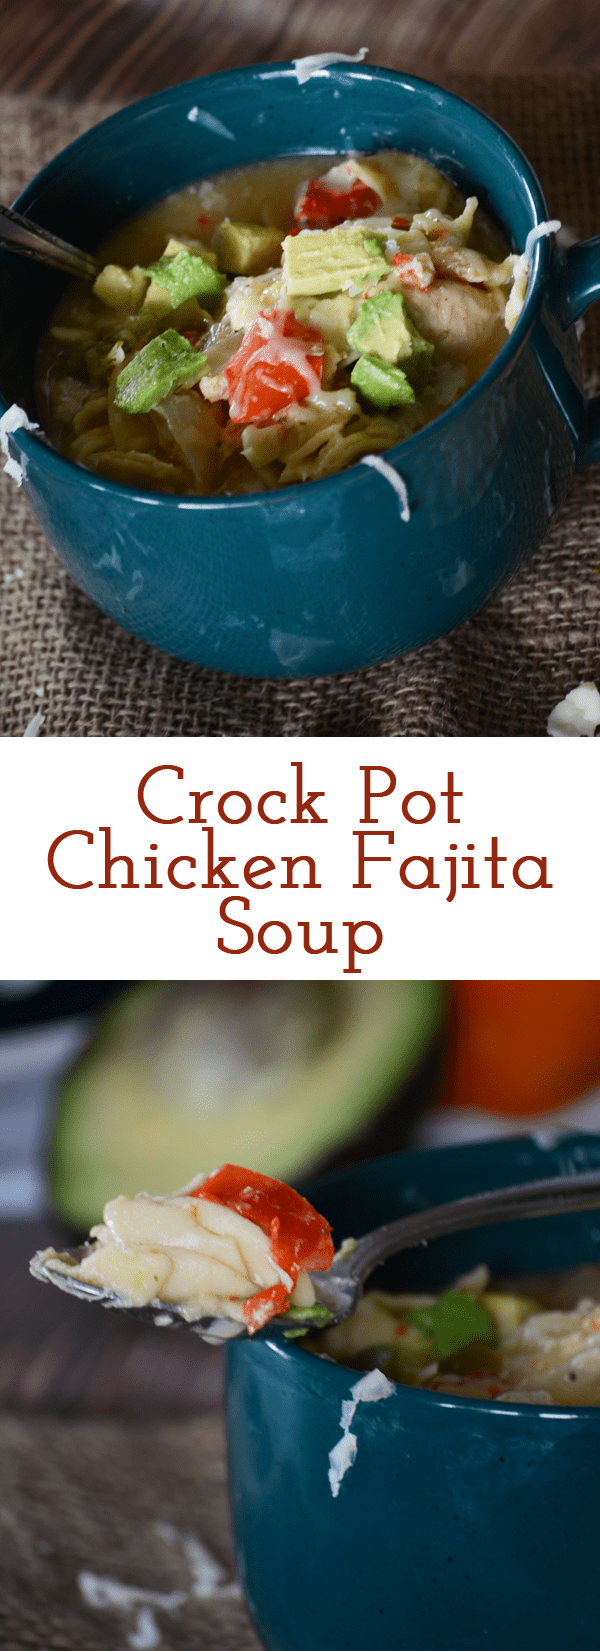 Perfect soup for a busy day or a cold evening! Crock pot chicken fajita soup combines all of your favorite flavors into one delicious dinner time recipe!